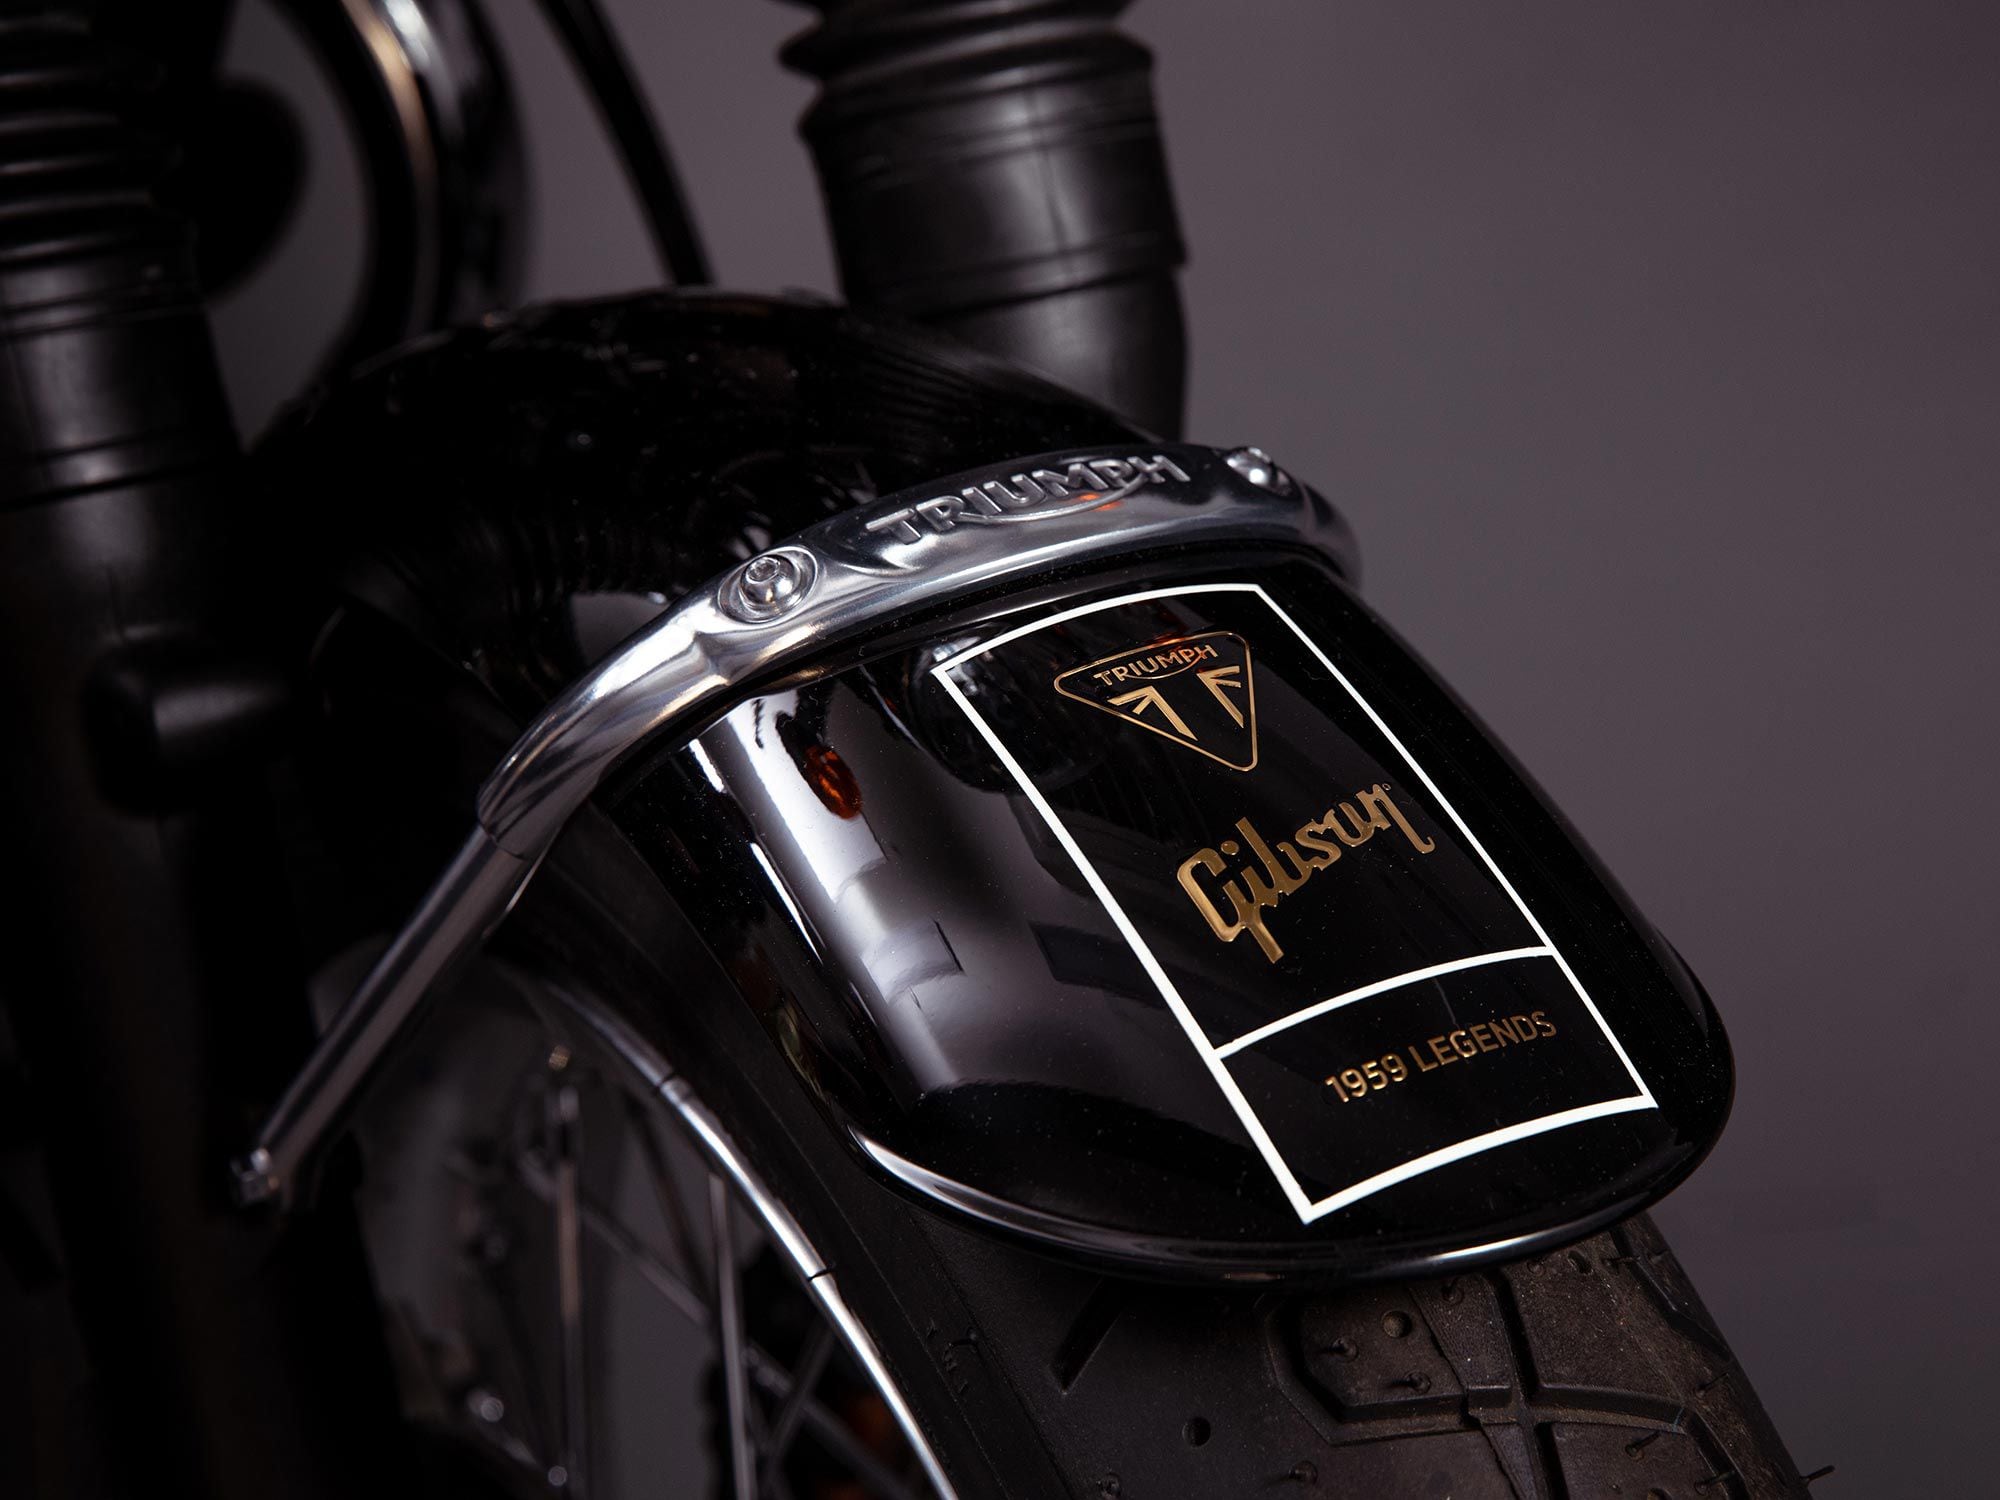 The rear fender is highlighted by a “1959 Legends” custom badge highlighting the partnership between Triumph and Gibson.